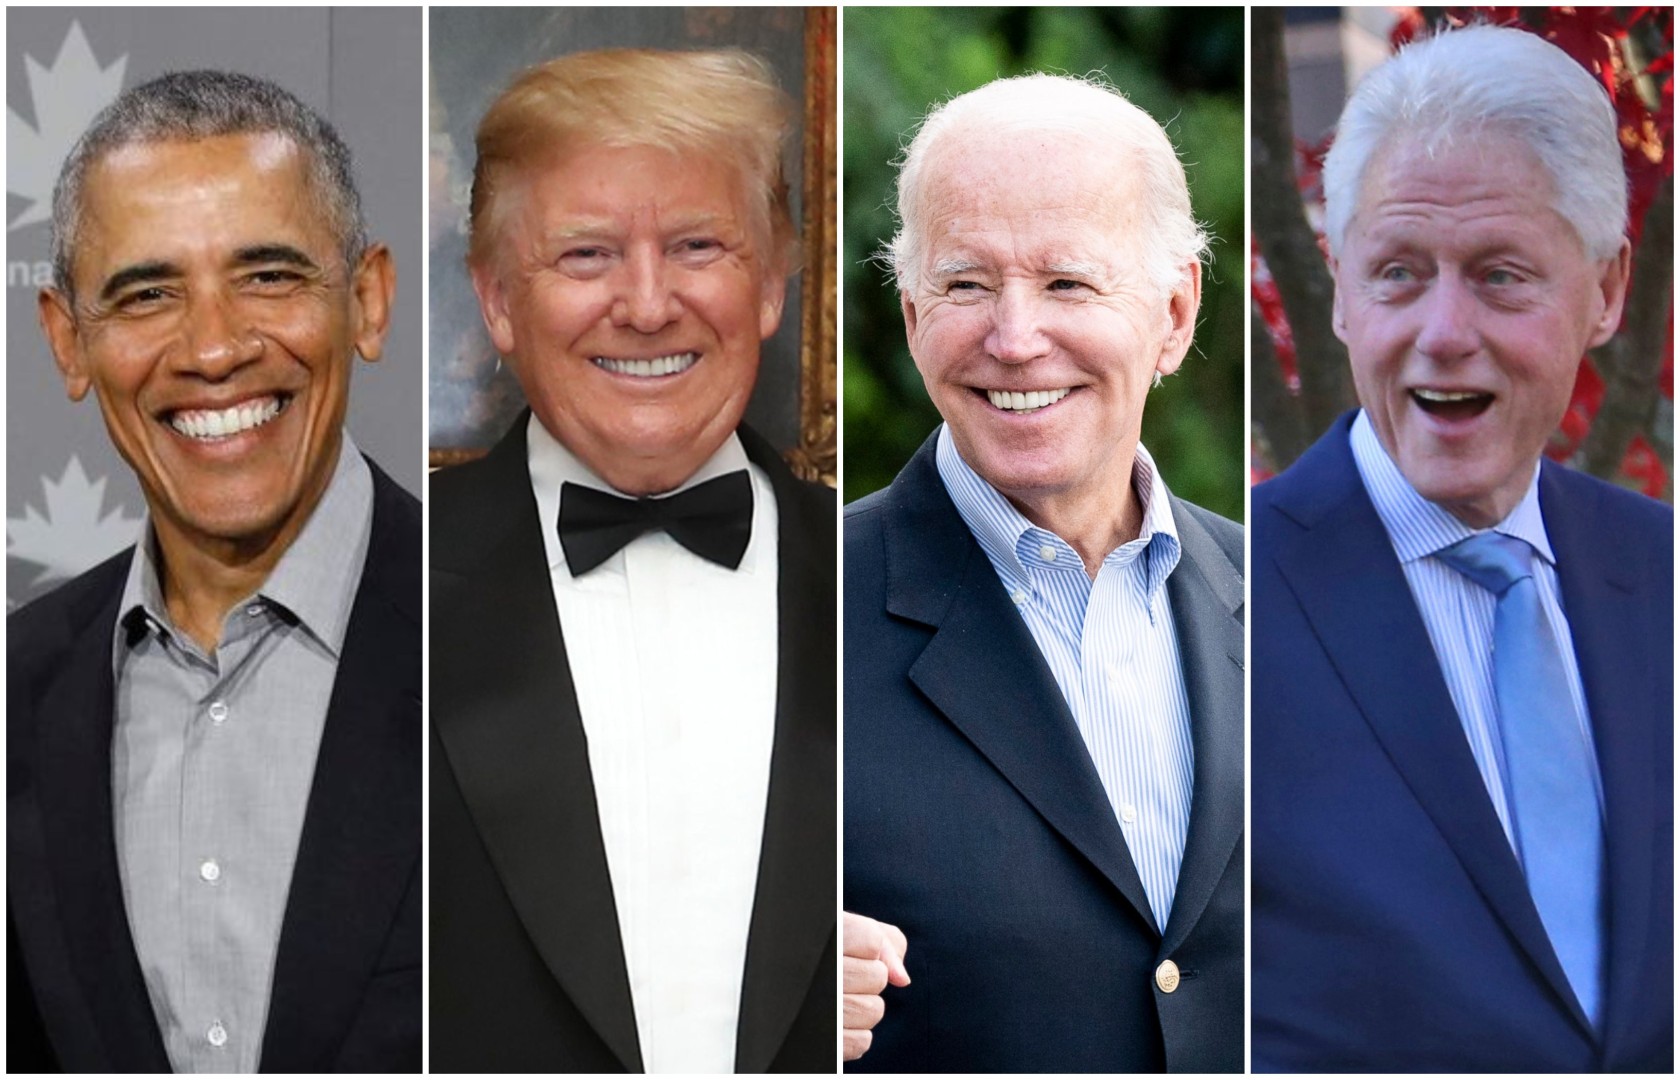 Who is the richest American president? Net worths, ranked: from Donald Trump's real estate fortune to Bill Clinton and Barack Obama's book deal millions, but how 'middle class Joe' Biden?